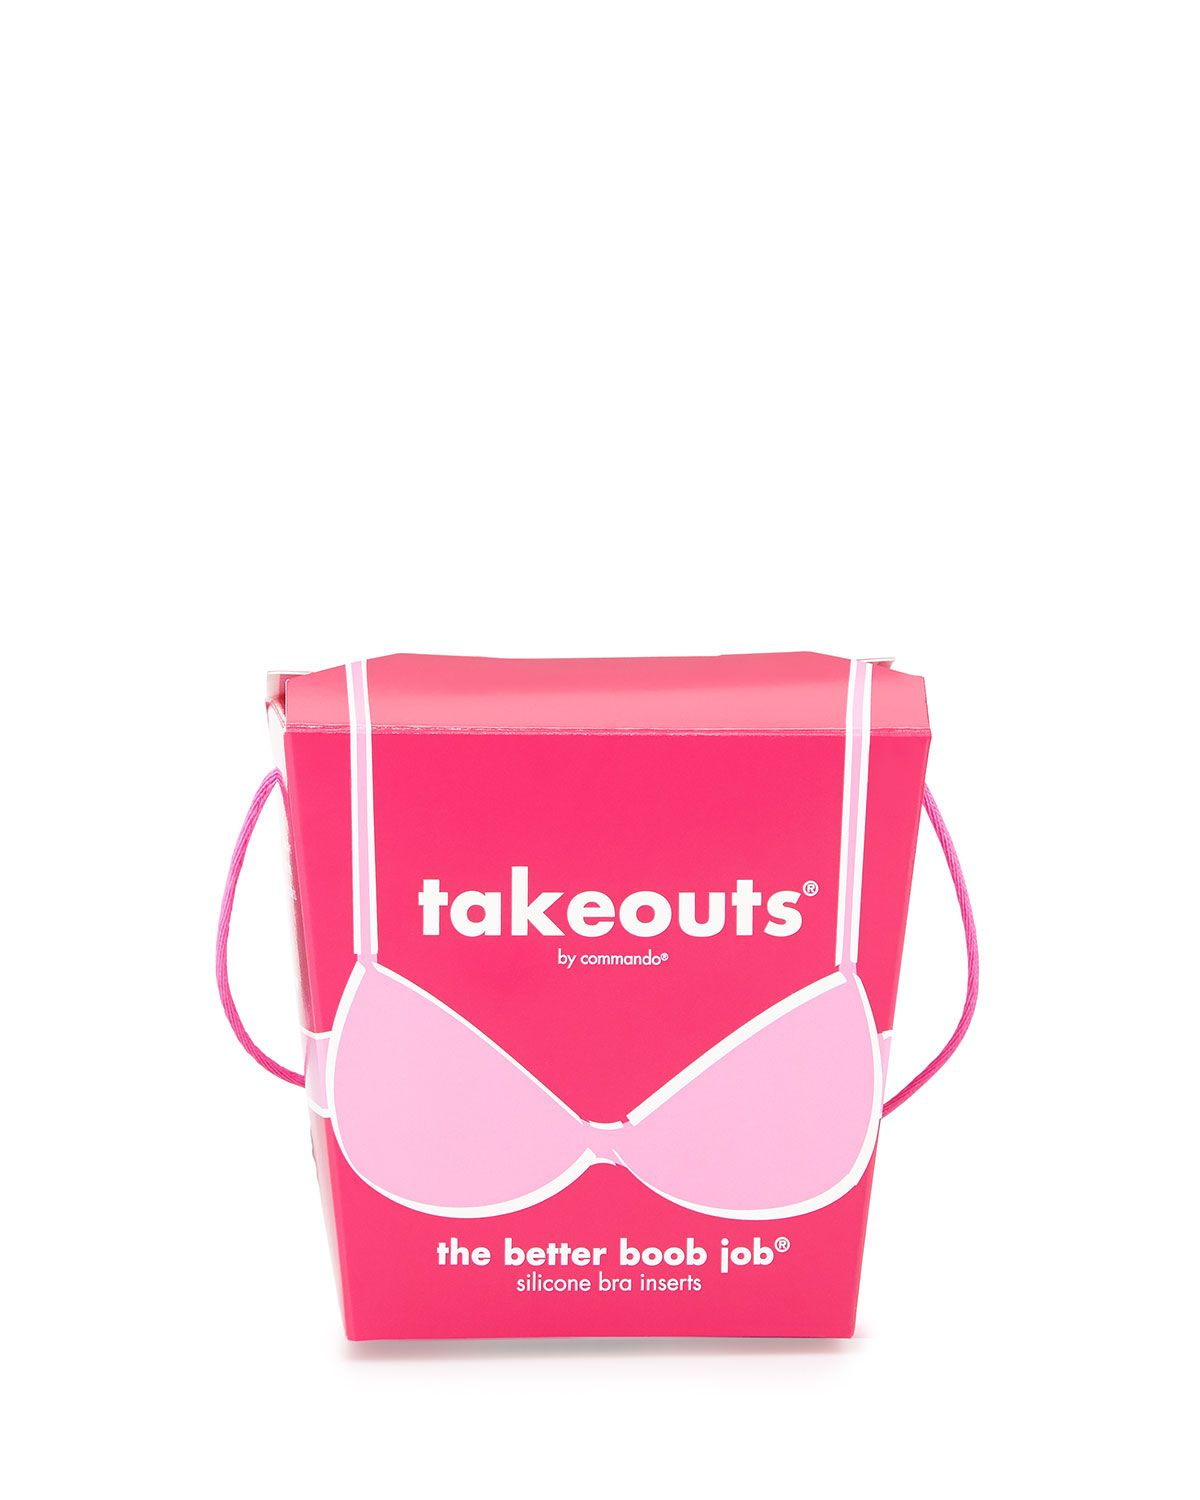 Takeouts the better boob job